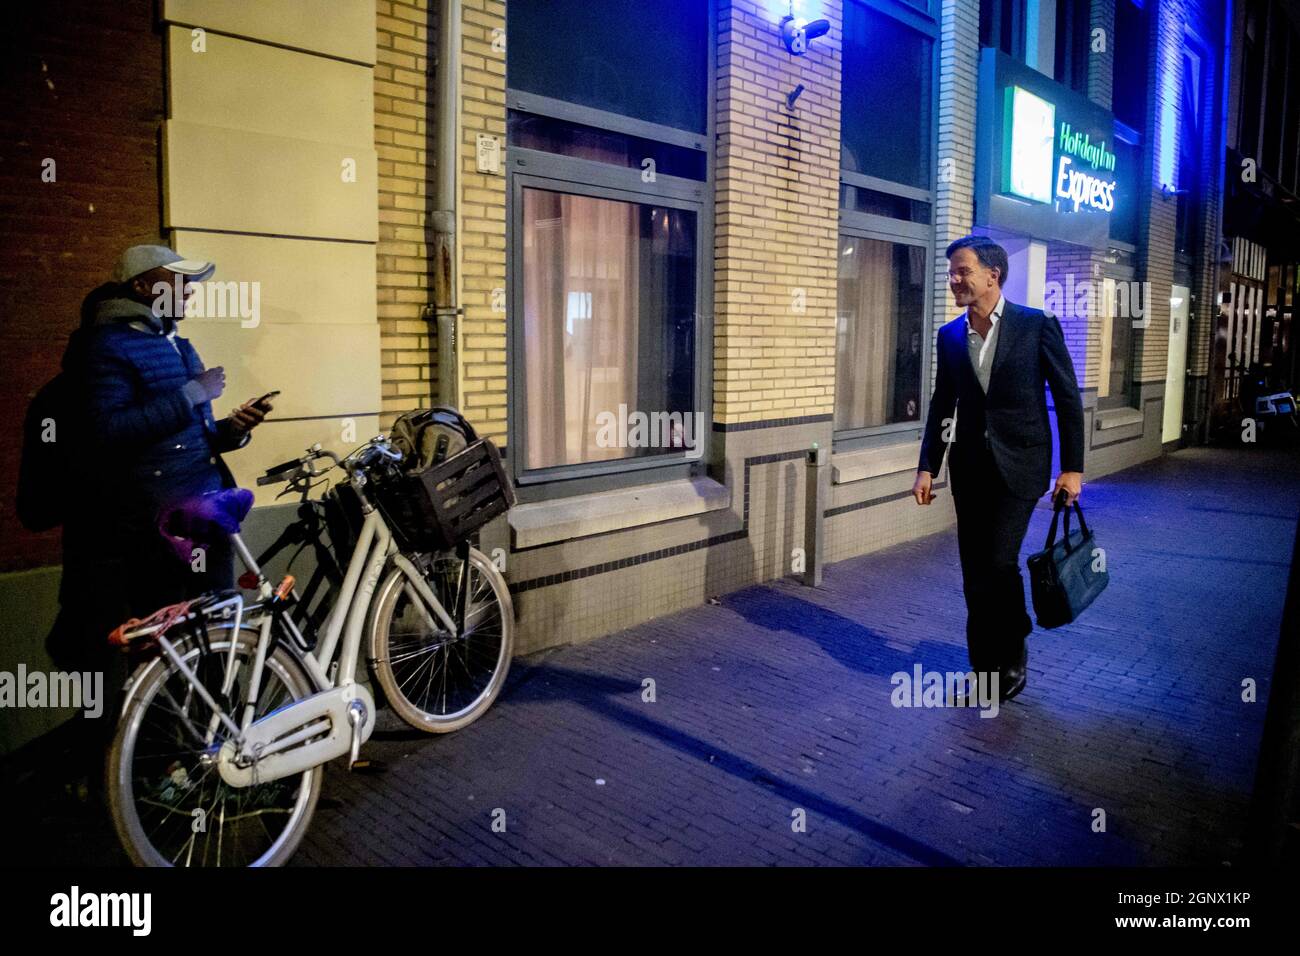 VVD party chairman Mark Rutte leaves after the formation meeting in the Logement, at The Hague on September 27, 2021. After hours of consultation led by informateur Johan Remkes, VVD, D66 and CDA have not yet reached an agreement on how to proceed with the formation of a new government coalition. Personal protection has been tightened around Dutch caretaker prime minister Mark Rutte amid fears that he is being targeted by drugs criminals, following the shooting dead of investigative journalist, Peter R De Vries, in July. Asked by reporters on Monday if suggestions of additional security and th Stock Photo